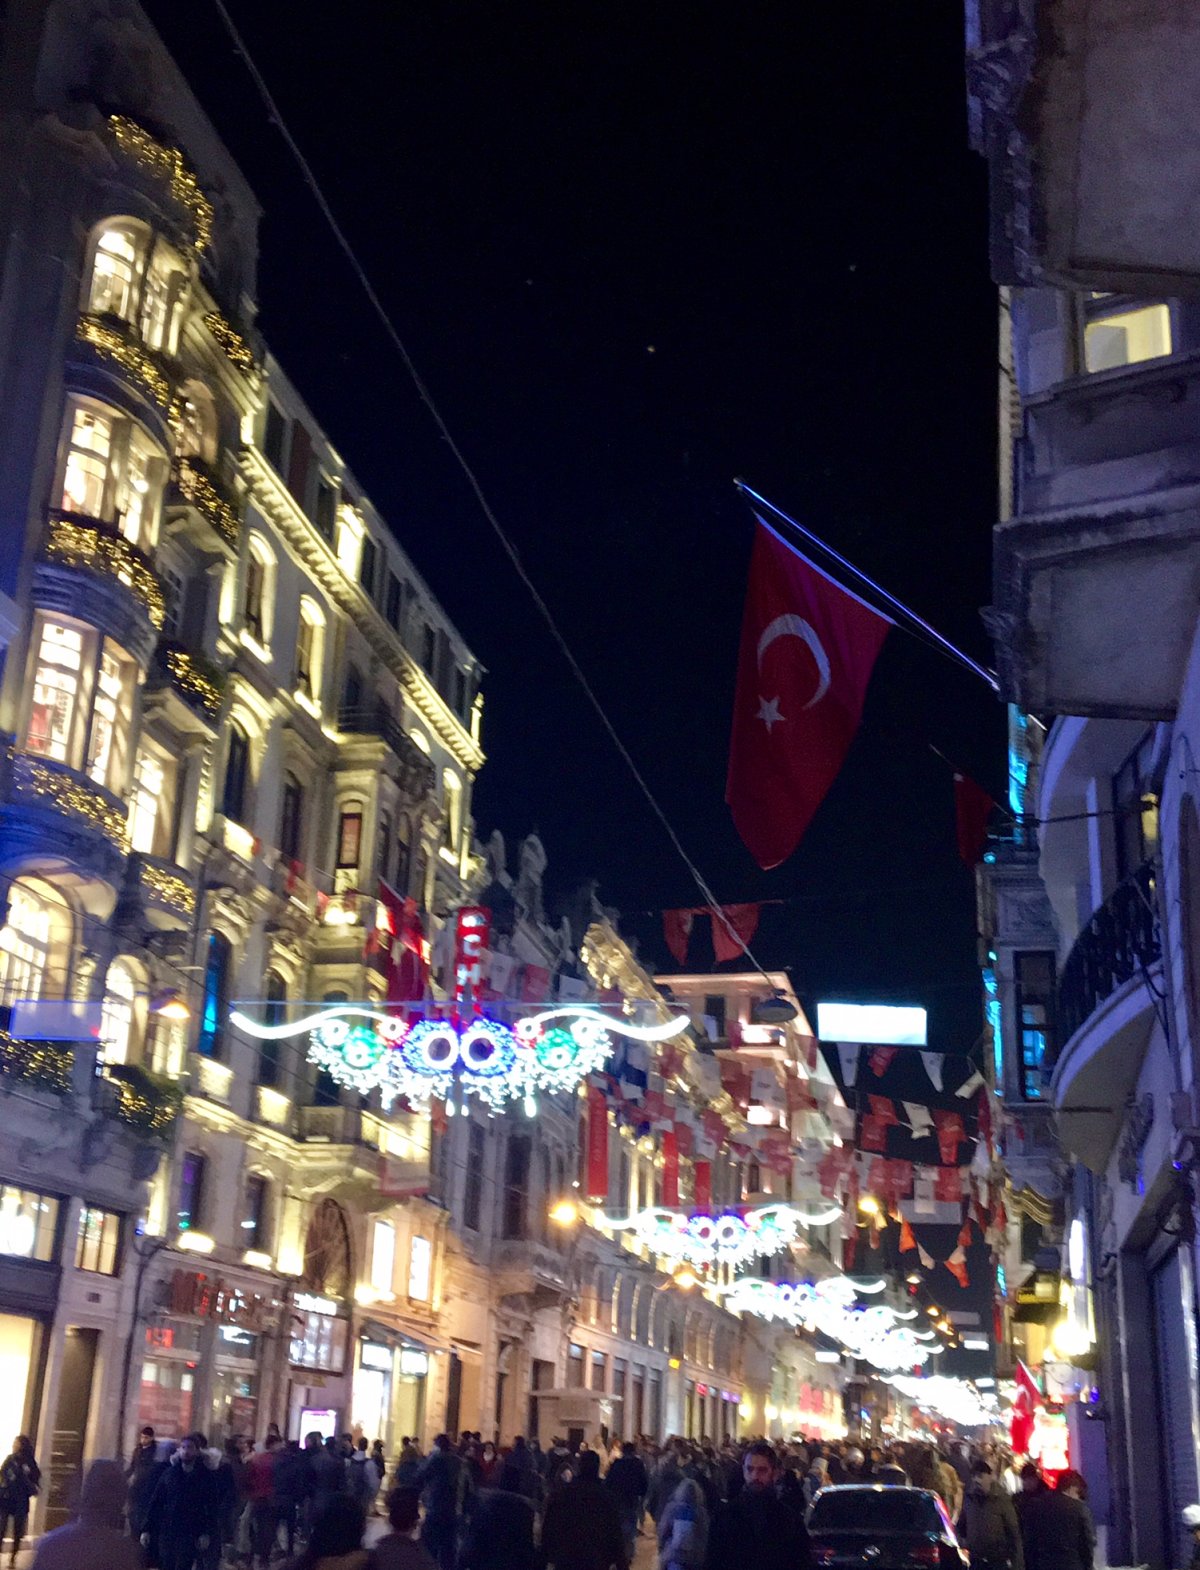 Istanbul just hours before the new year's day nightclub attack.